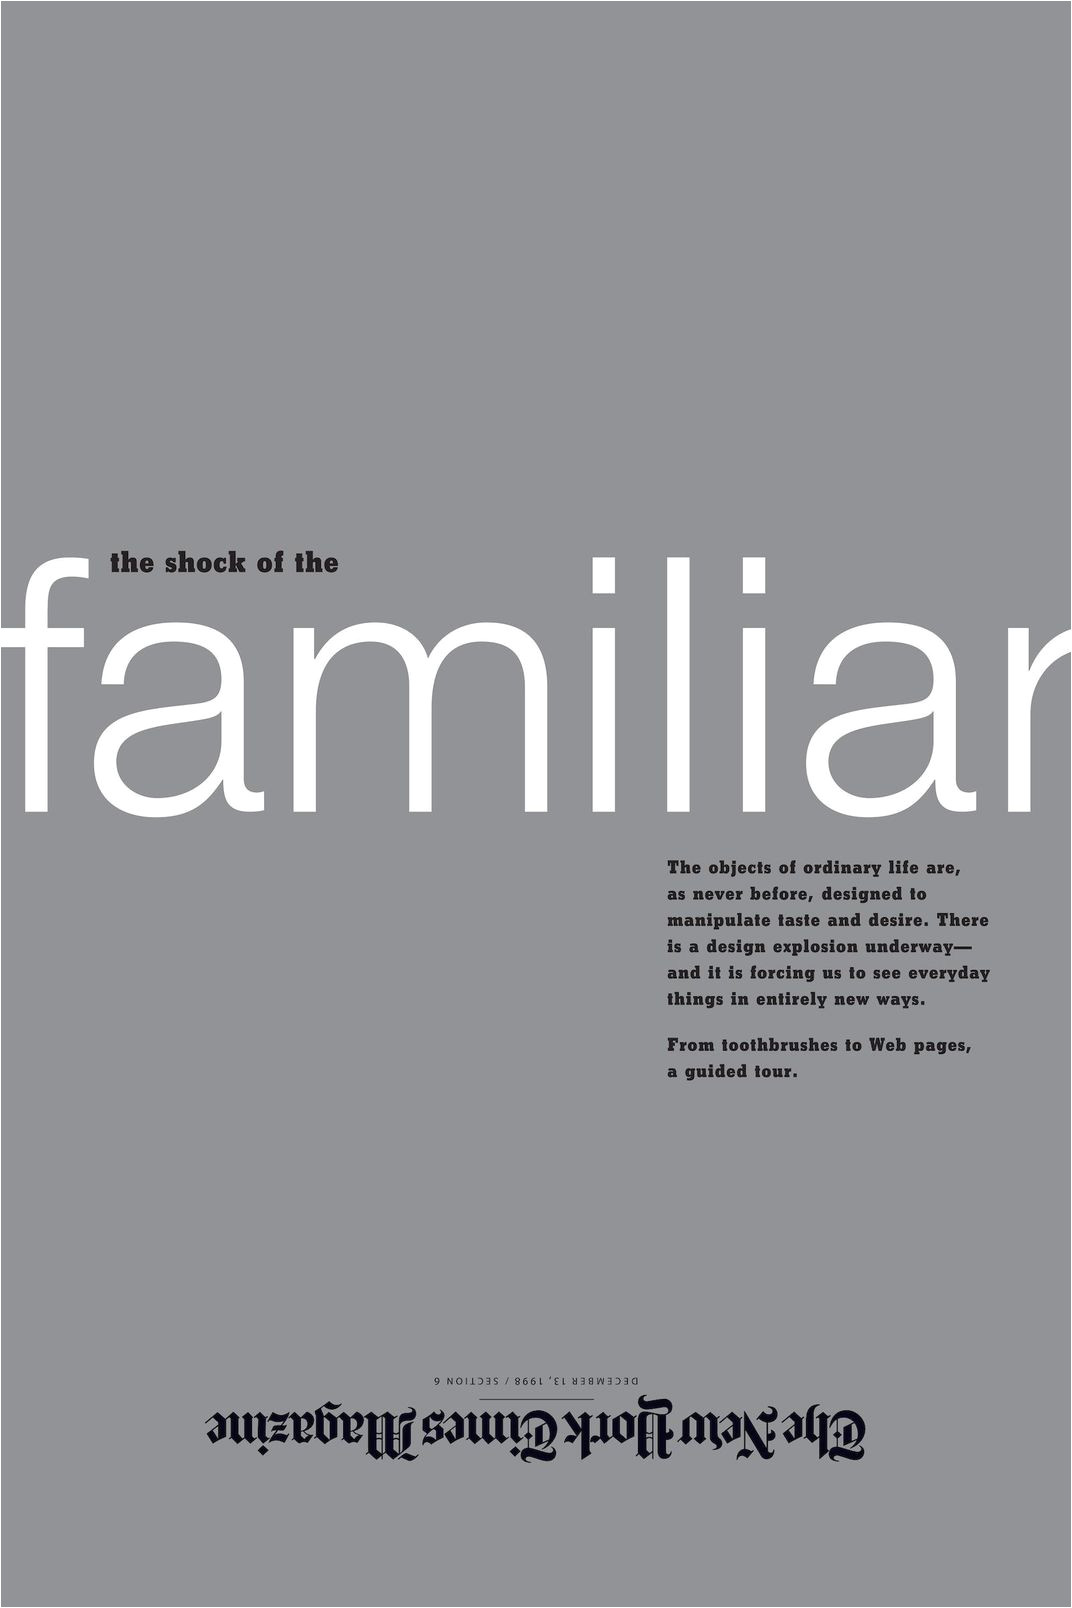 the shock of the familiar a cover design for the new york times magazine that examines how design is inherent in all objects yet is often invisible to the